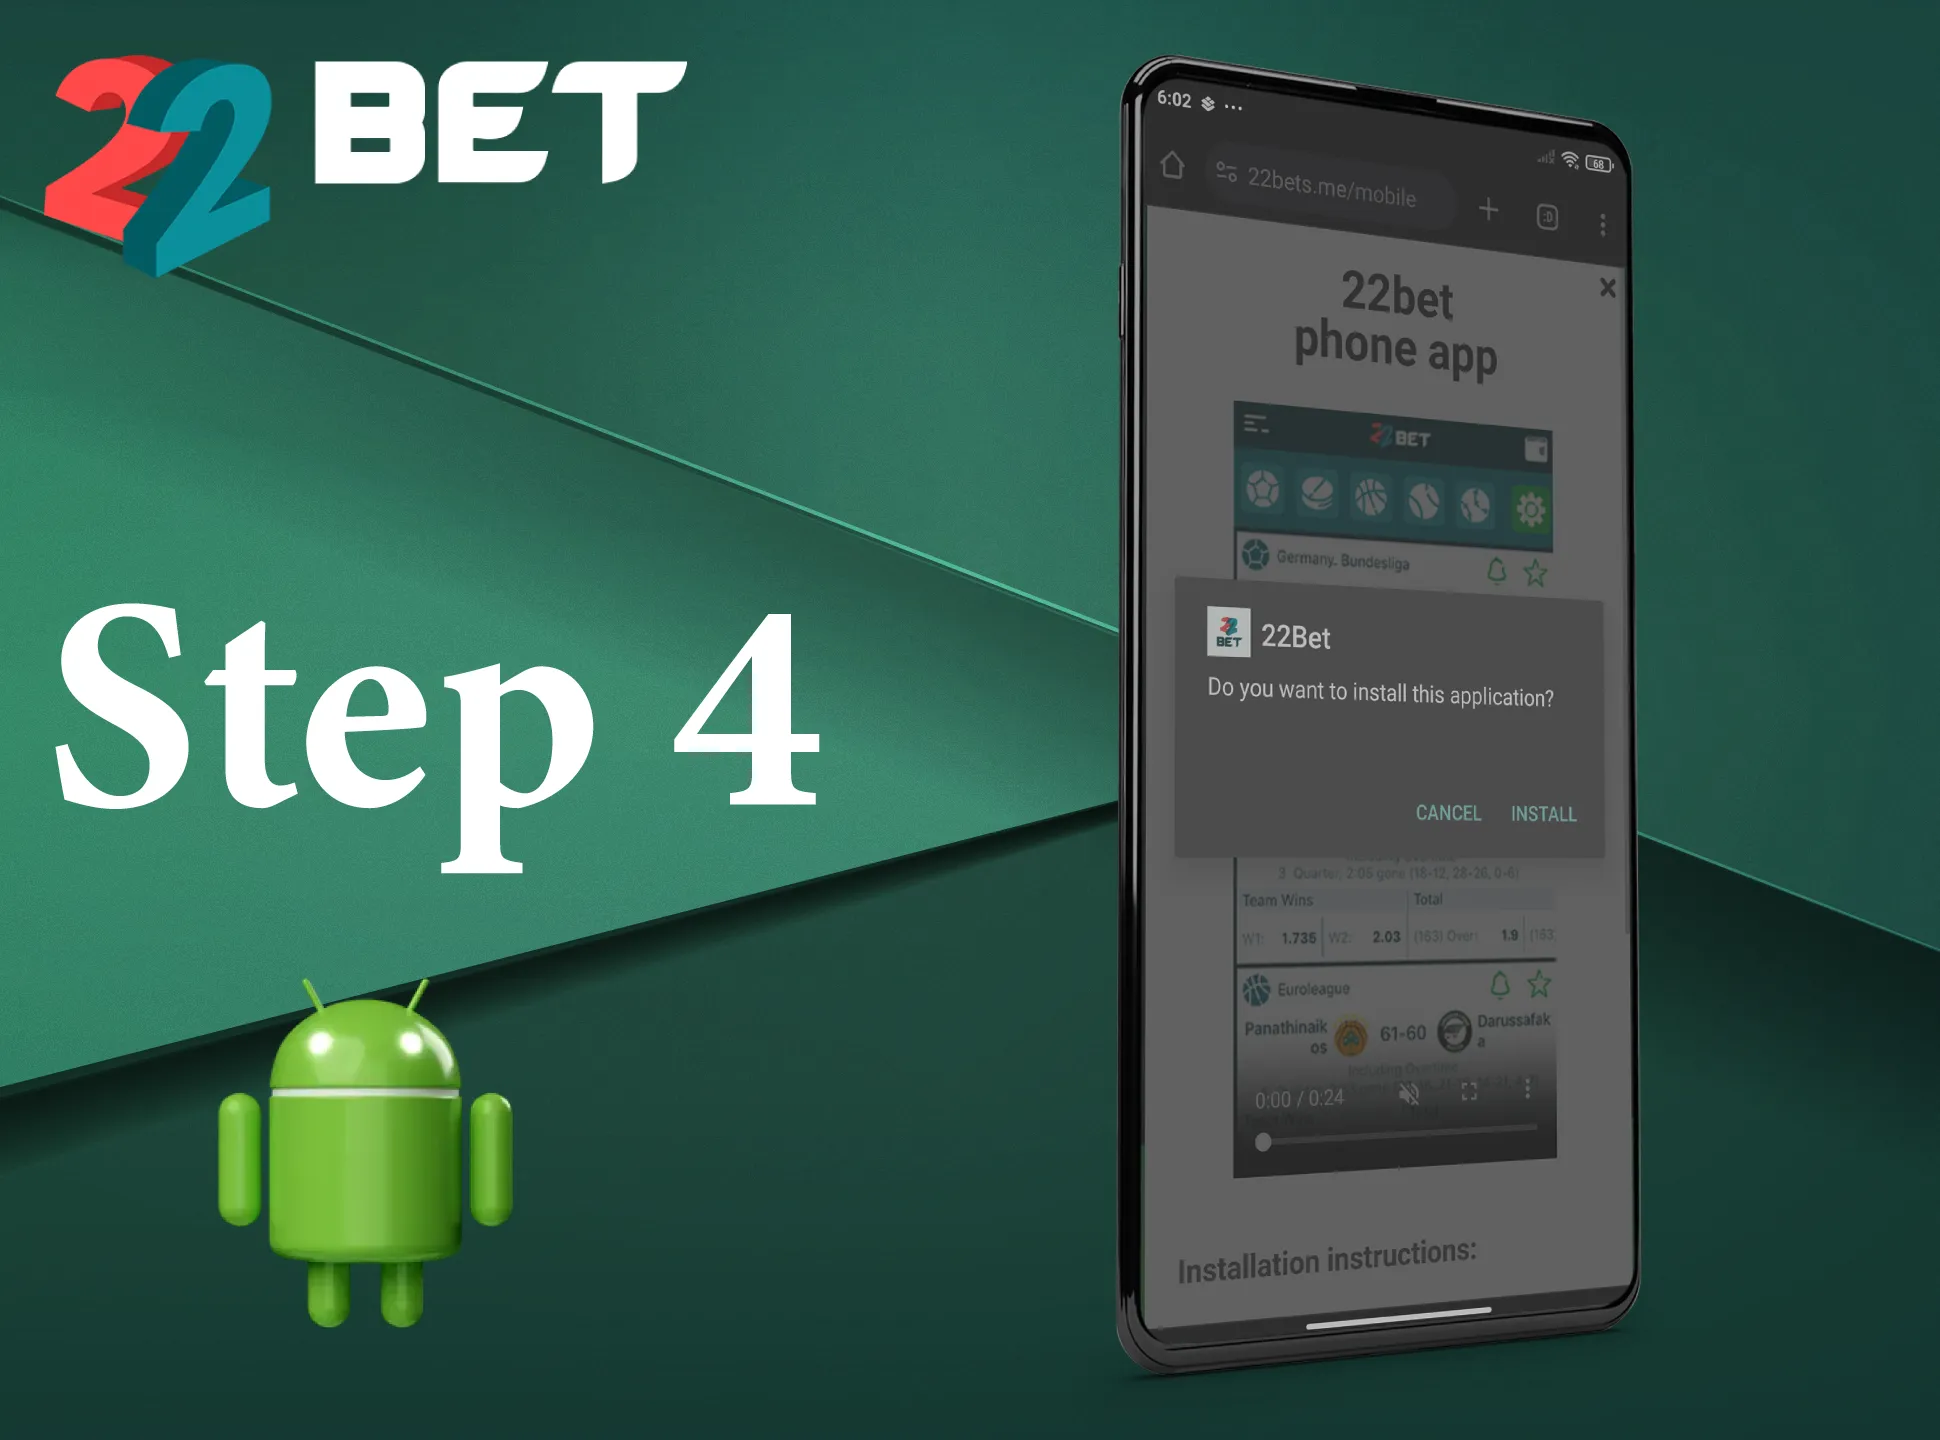 Install the 22Bet app and log in to start betting.